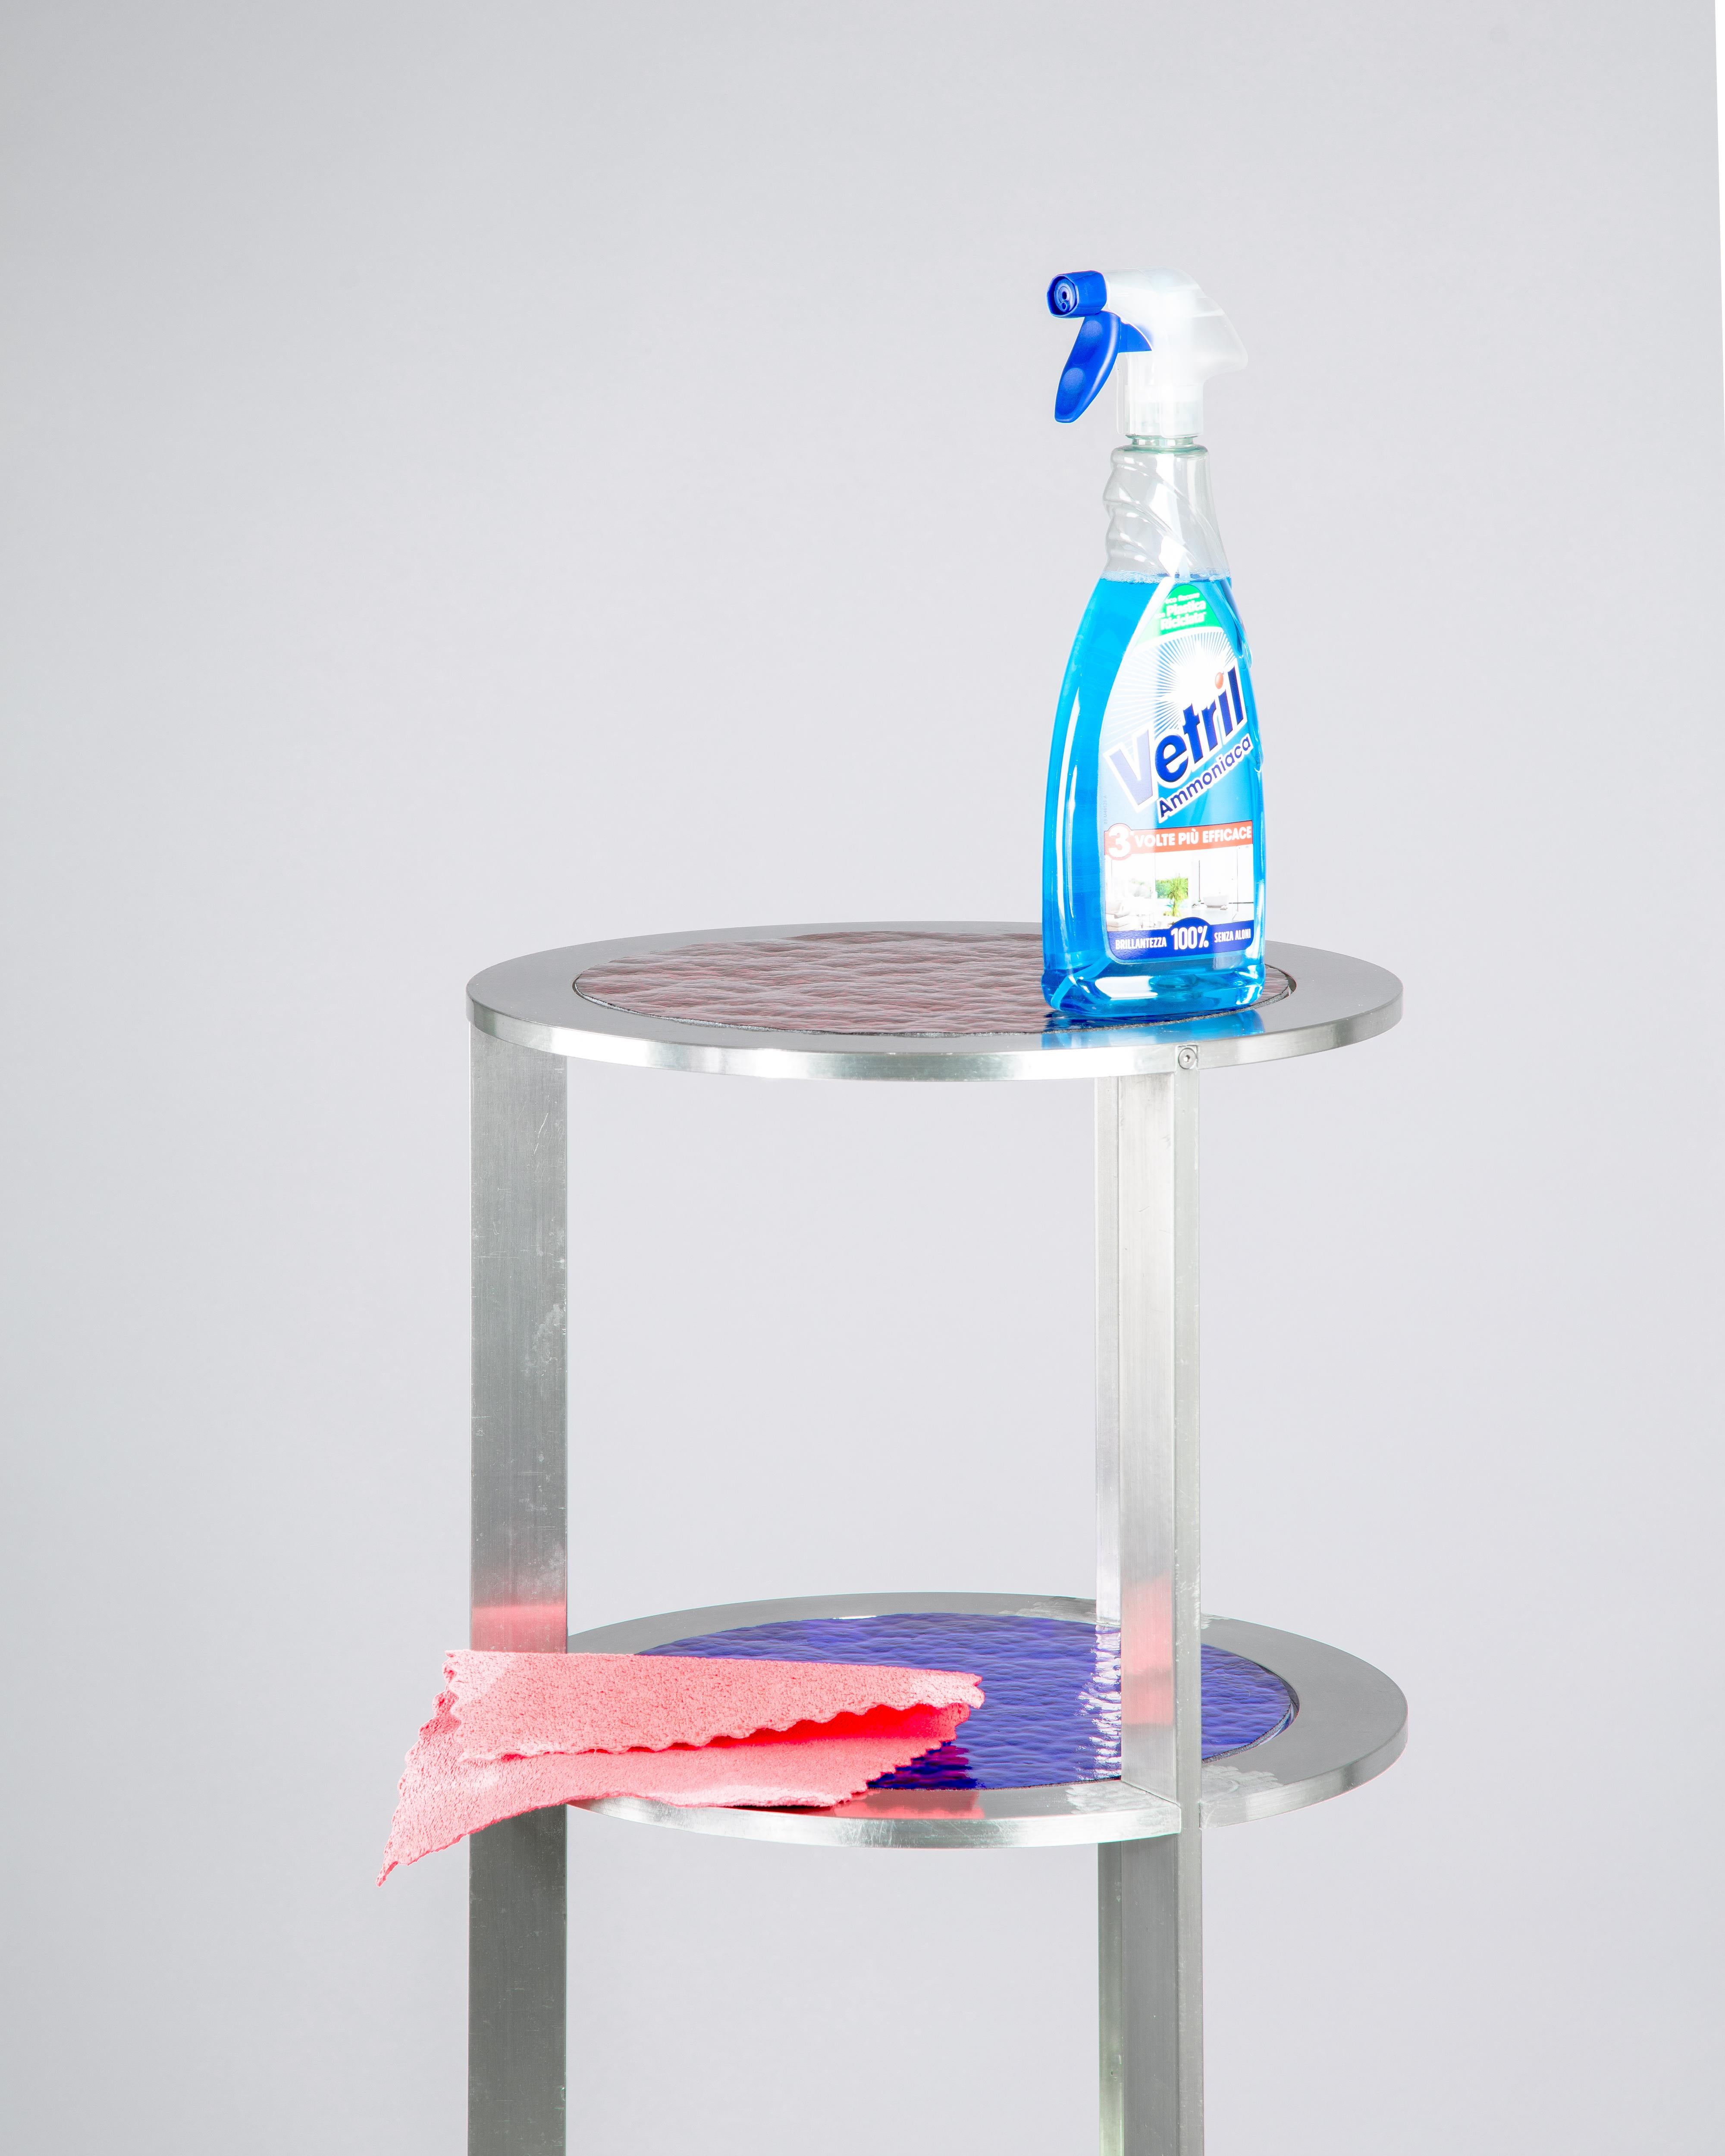 NASA Colonna shelf by Daniel Nikolovski
Dimensions: ø39 x H 120 cm
Materials: Aluminium, Colored Glass

NASA Colonna is a circular shelf that is composed from four aluminium rings containing multi-coloured cathedral glass. This flat-packed